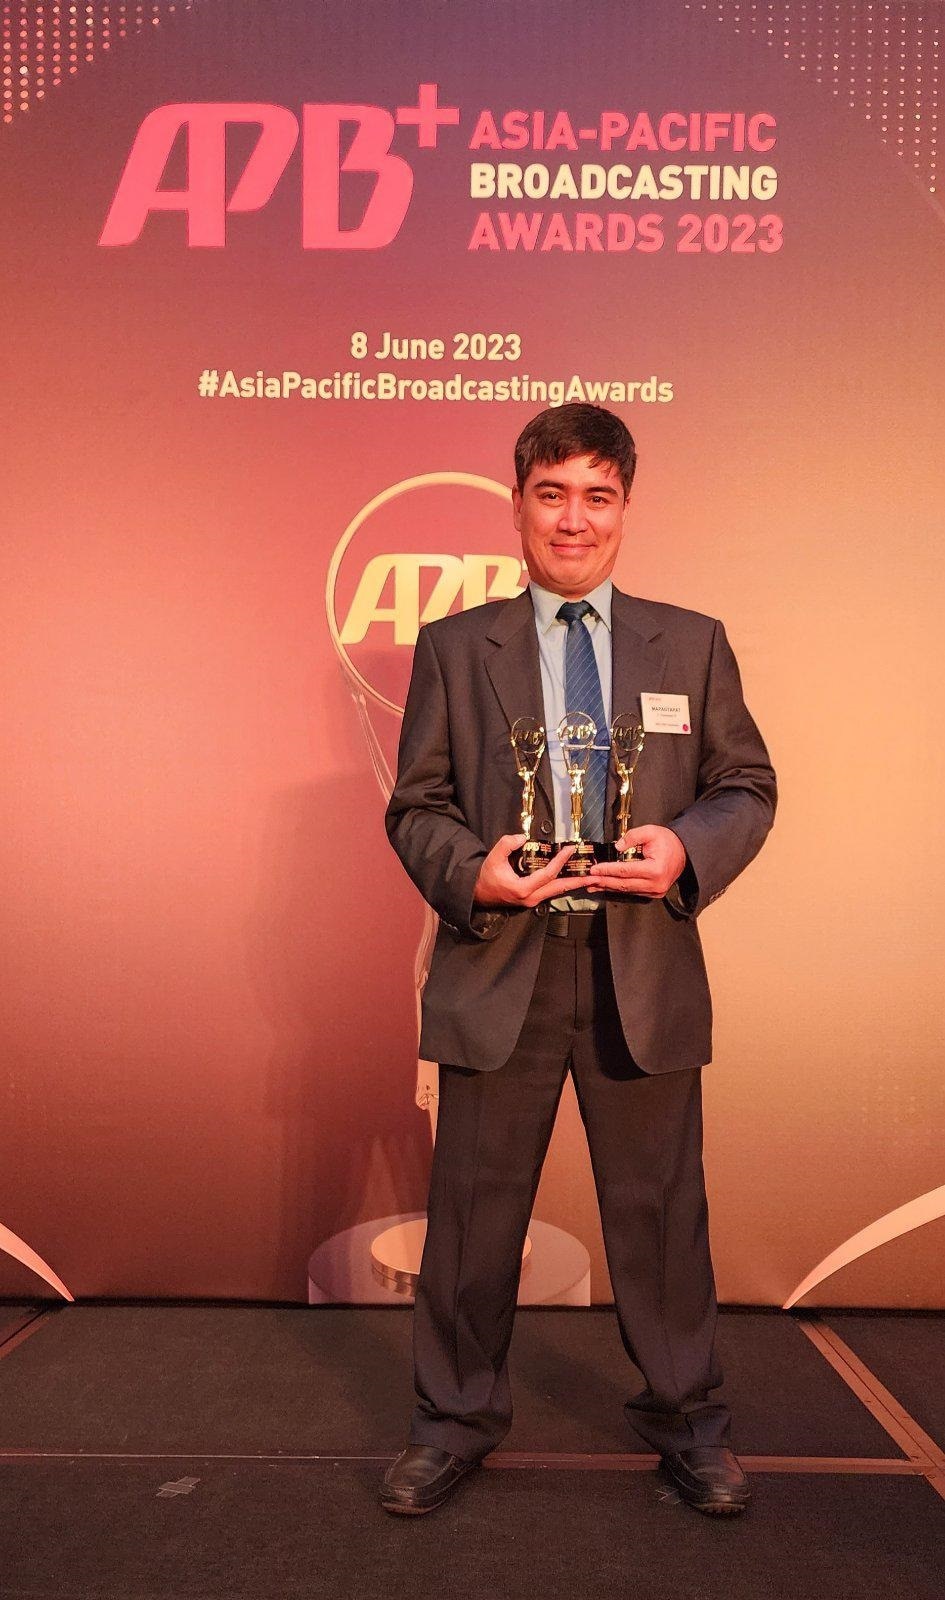 Patrick Ongchango, Head of ABS-CBN Media Engineering, received the Excellence Award for OTT Platform for ABS-CBN Global's 'iWantTFC', the Innovation Award for Cloud-Playout Migration, and the Innovation Award for Audio Description for Big Dipper, at the Asia-Pacific Broadcasting Awards in Singapore on June 8, 2023. Photo by Val Cuenca, ABS-CBN News